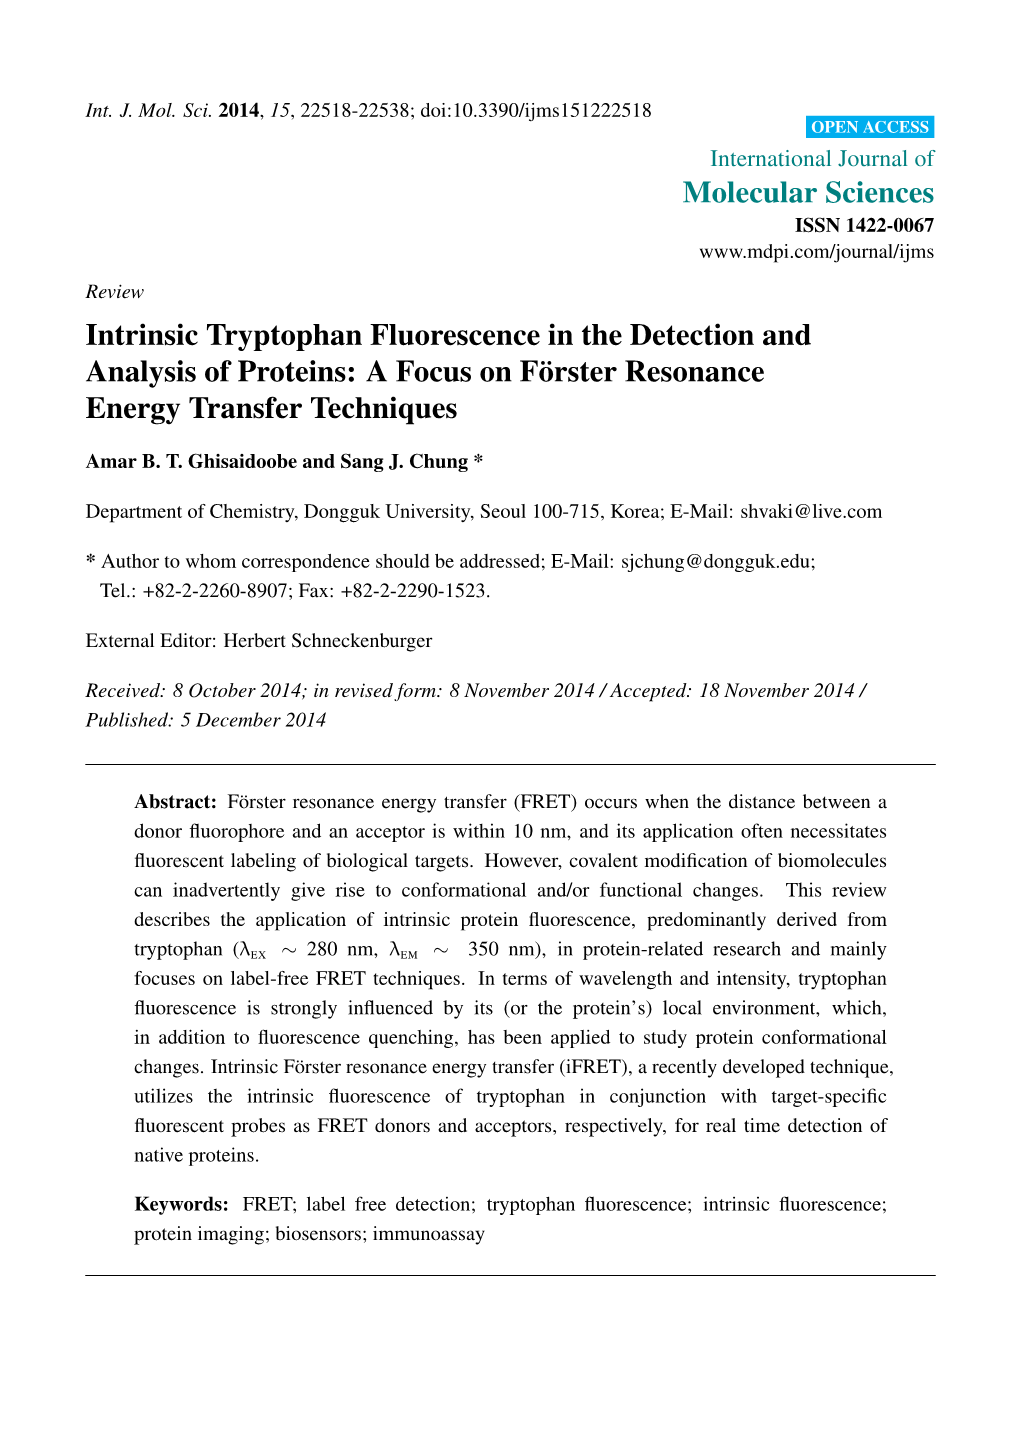 Intrinsic Tryptophan Fluorescence in the Detection and Analysis of Proteins: a Focus on Förster Resonance Energy Transfer Techniques